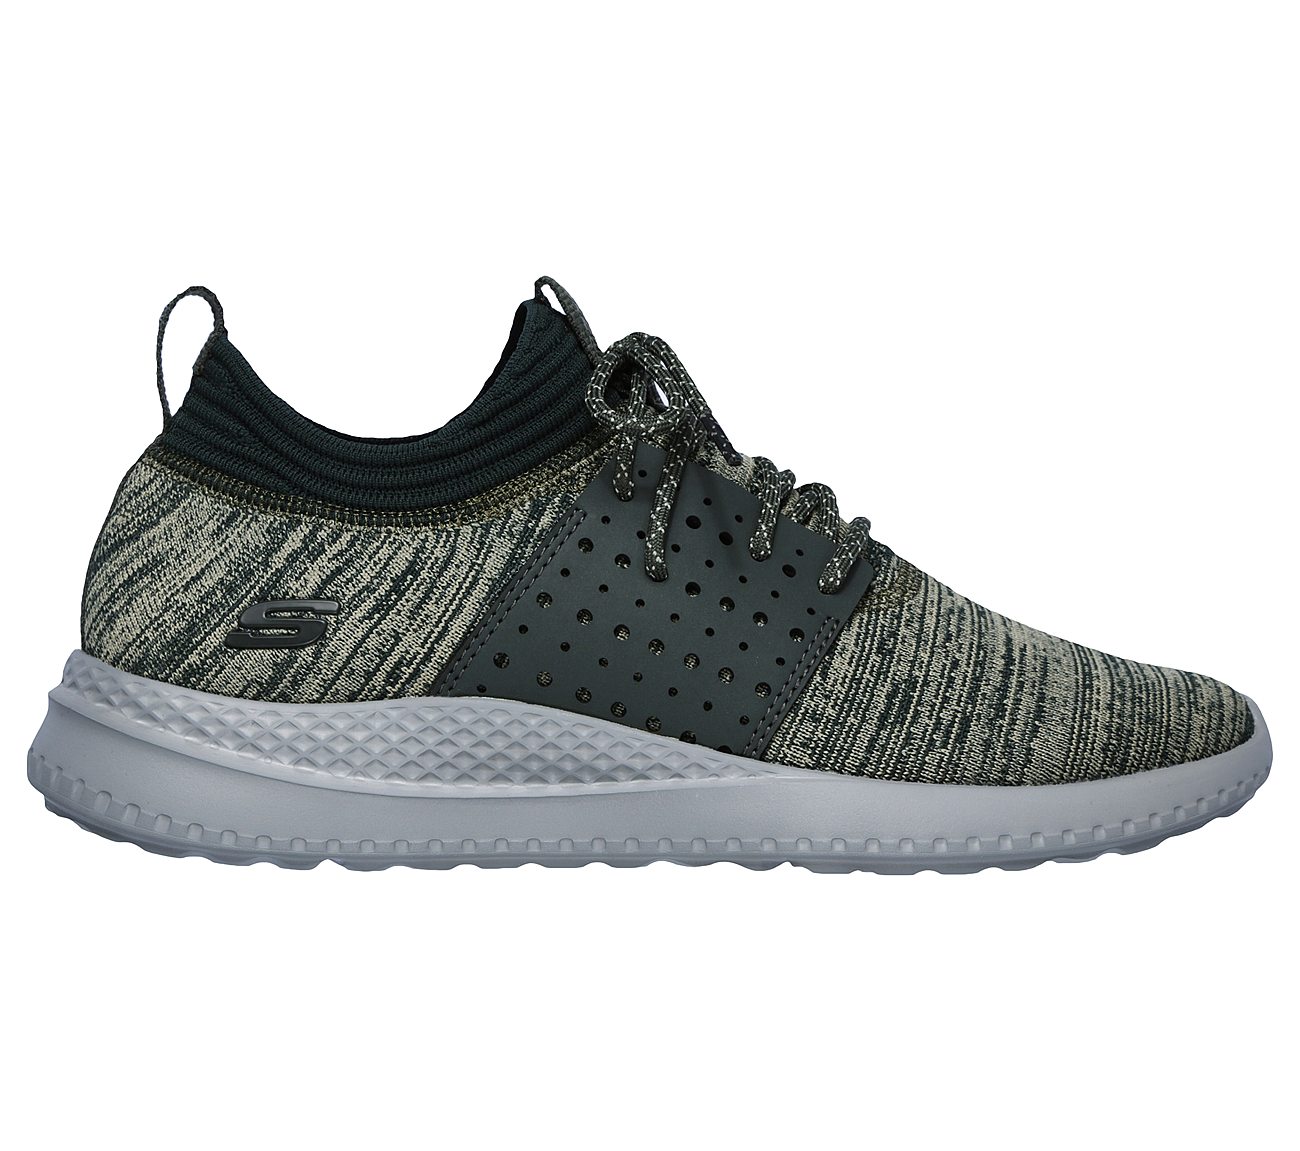 Buy SKECHERS Matera - Knocto Sport Shoes